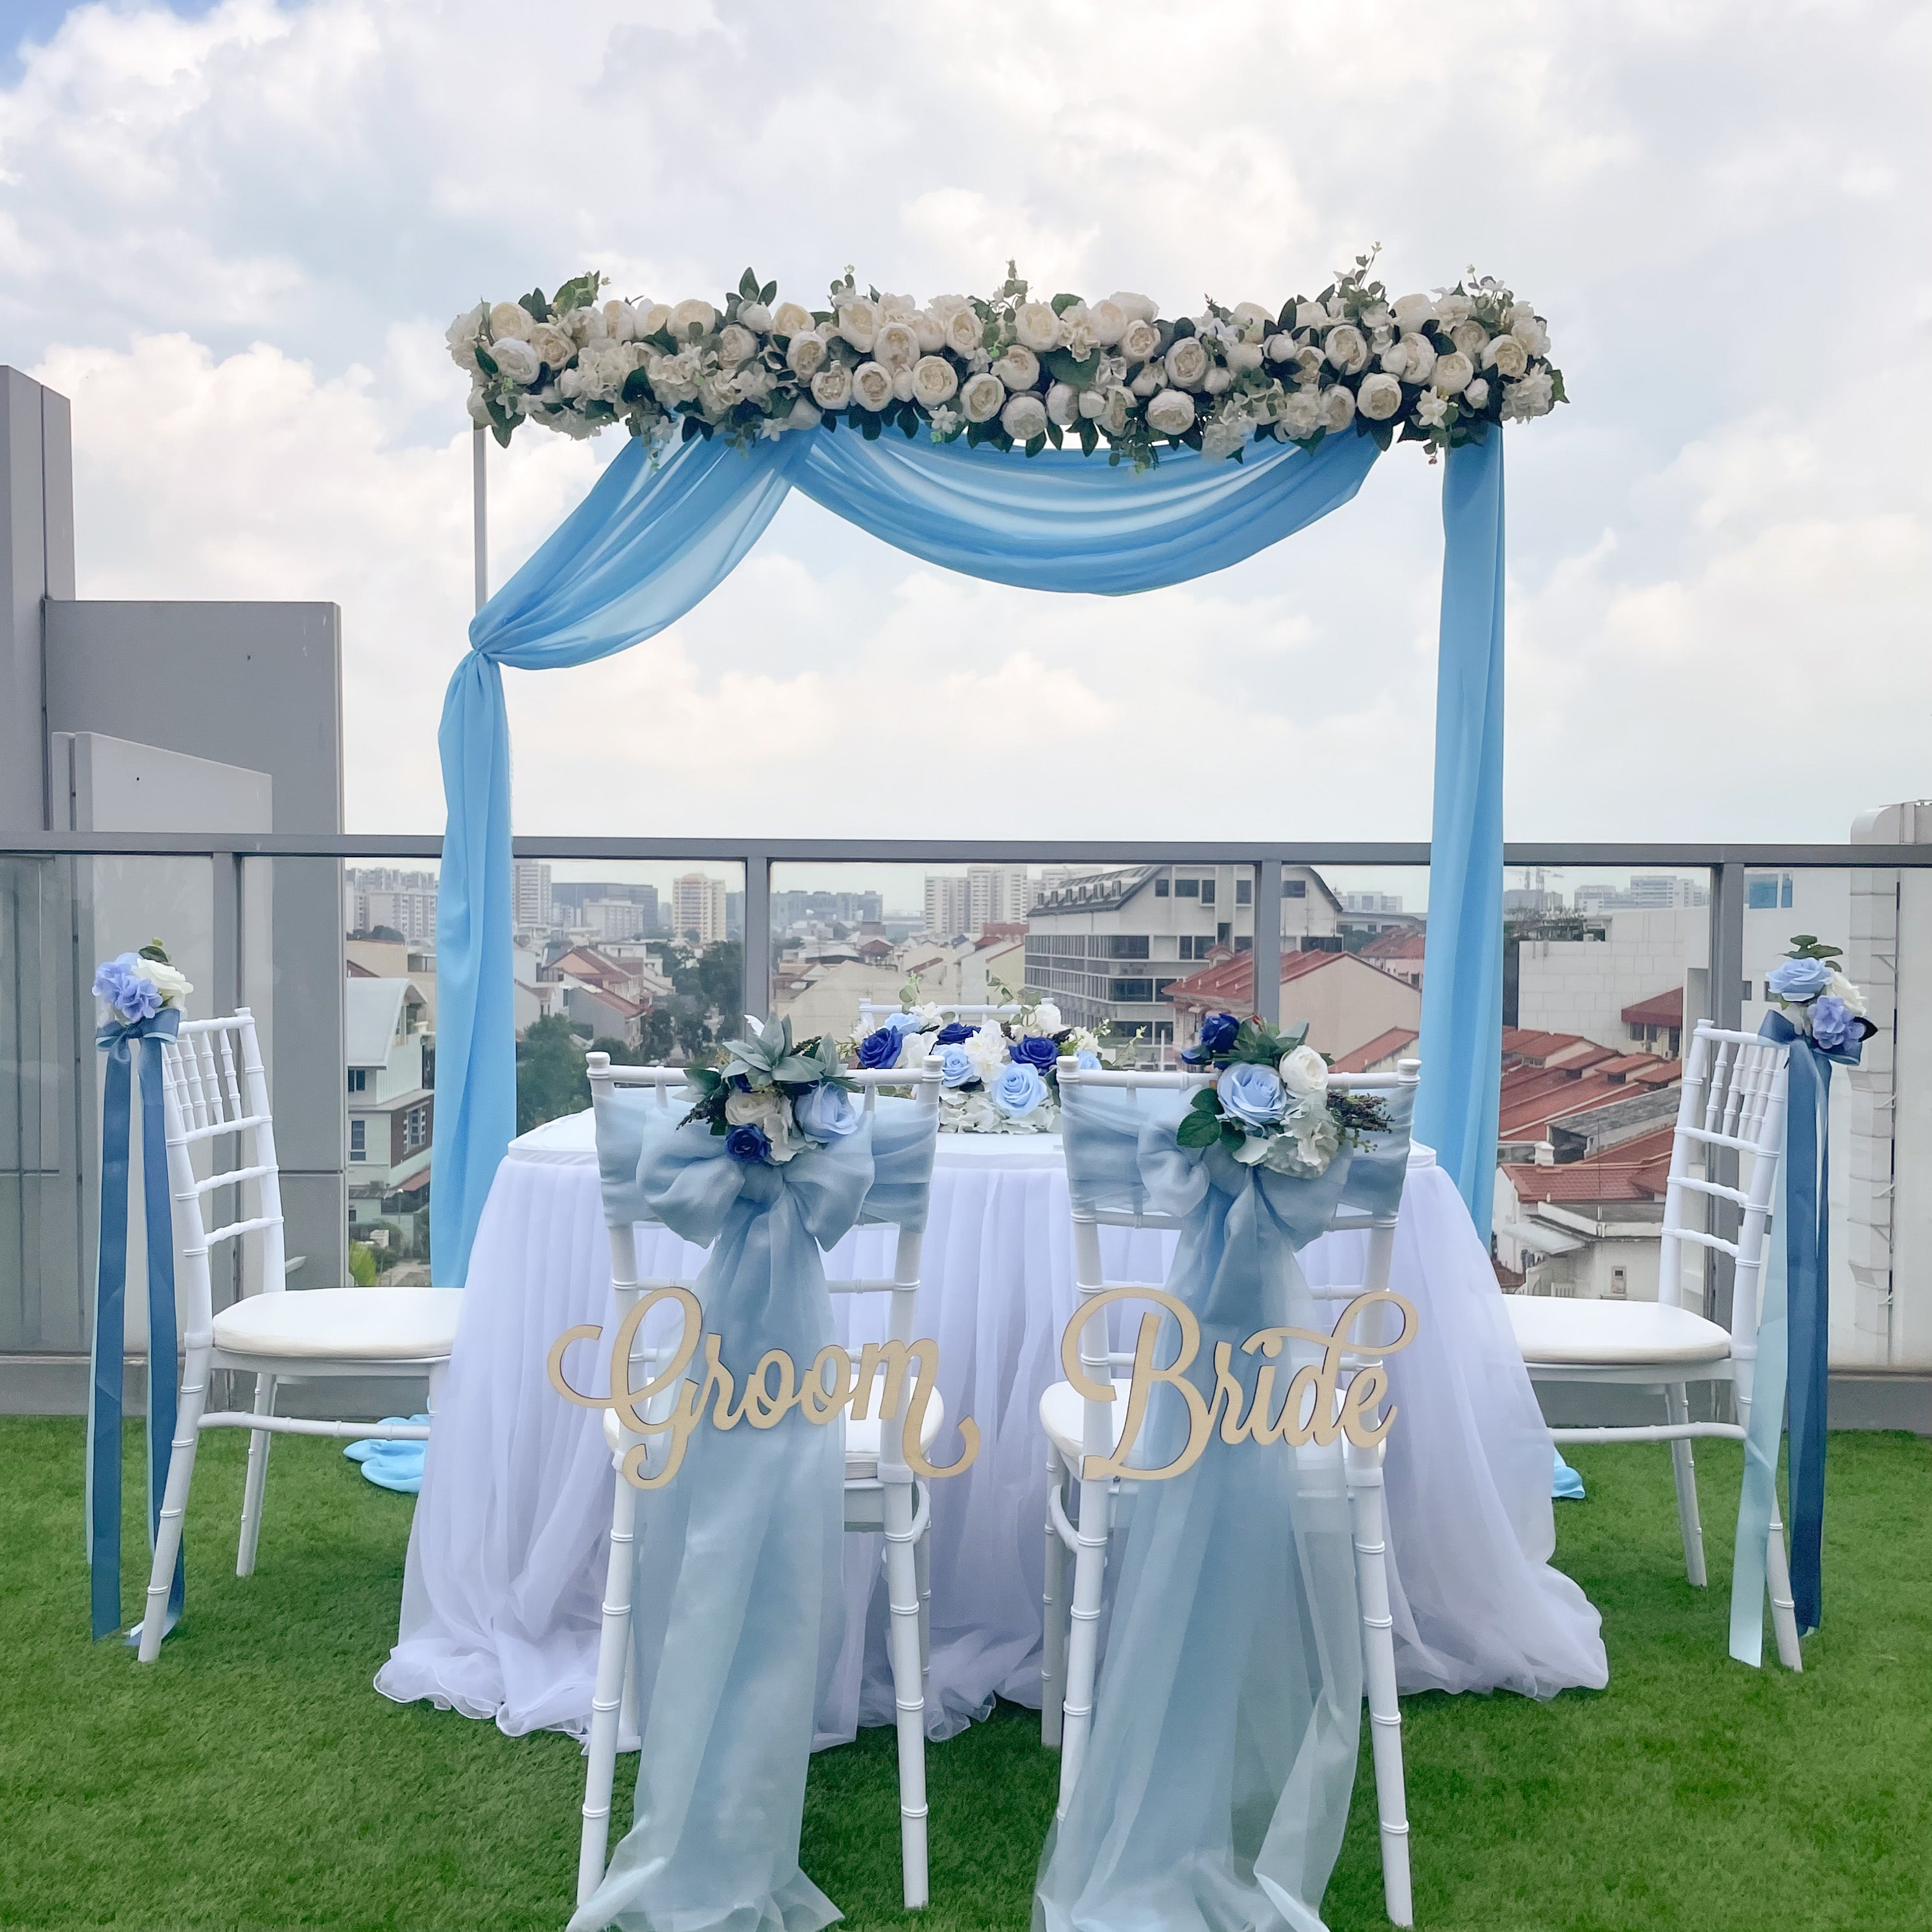 Sweet and Simple Outdoor Solemnisation/ROM Decor in Singapore - Blue & White Theme 